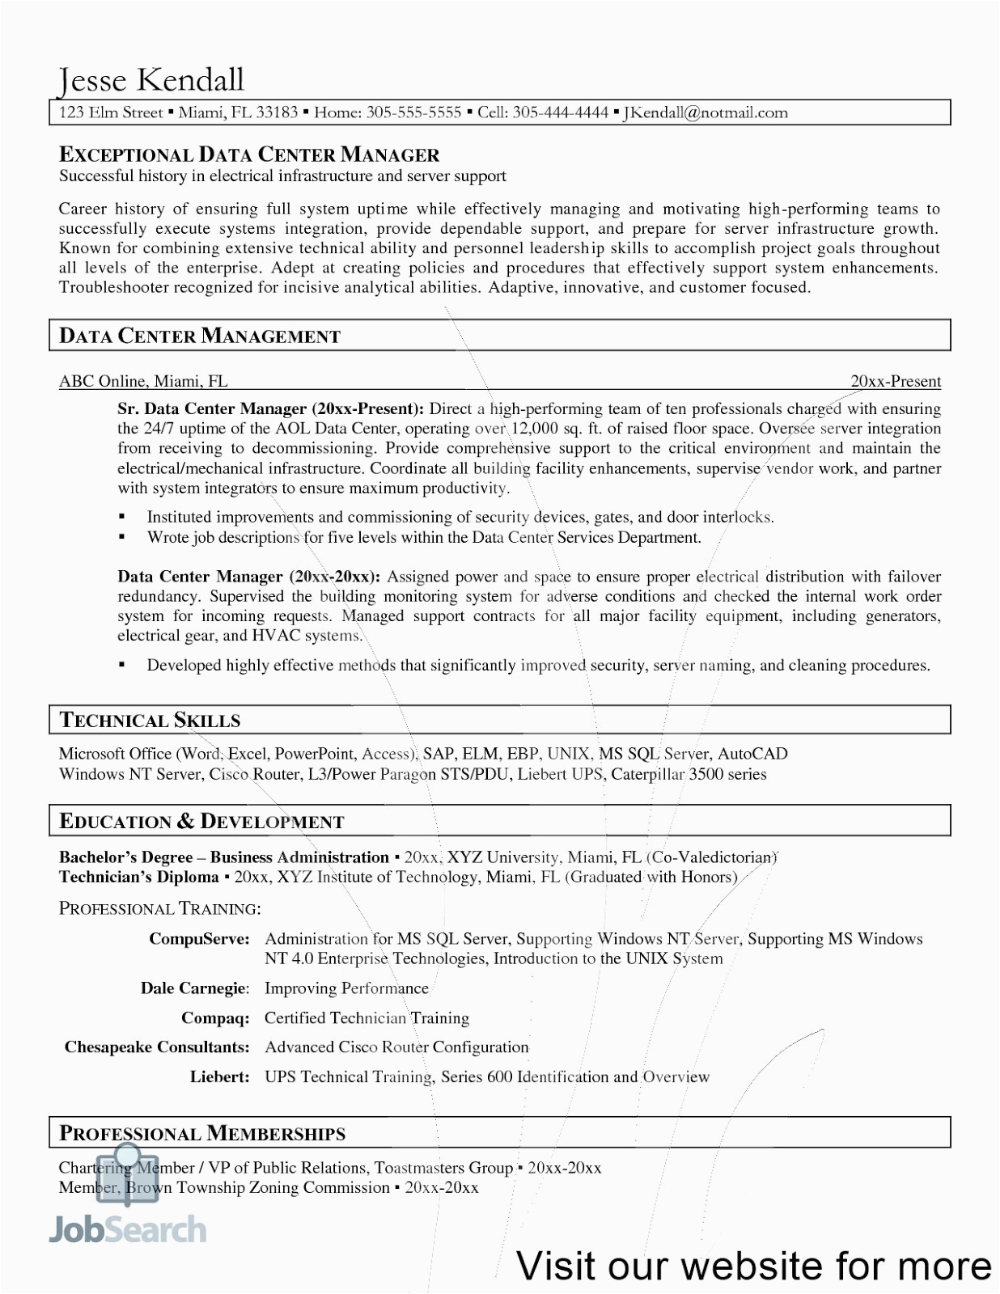 Sample Resume for A Gym Manager Gym Manager Resume Examples Gym Manager Resume Objective 2020 In 2020